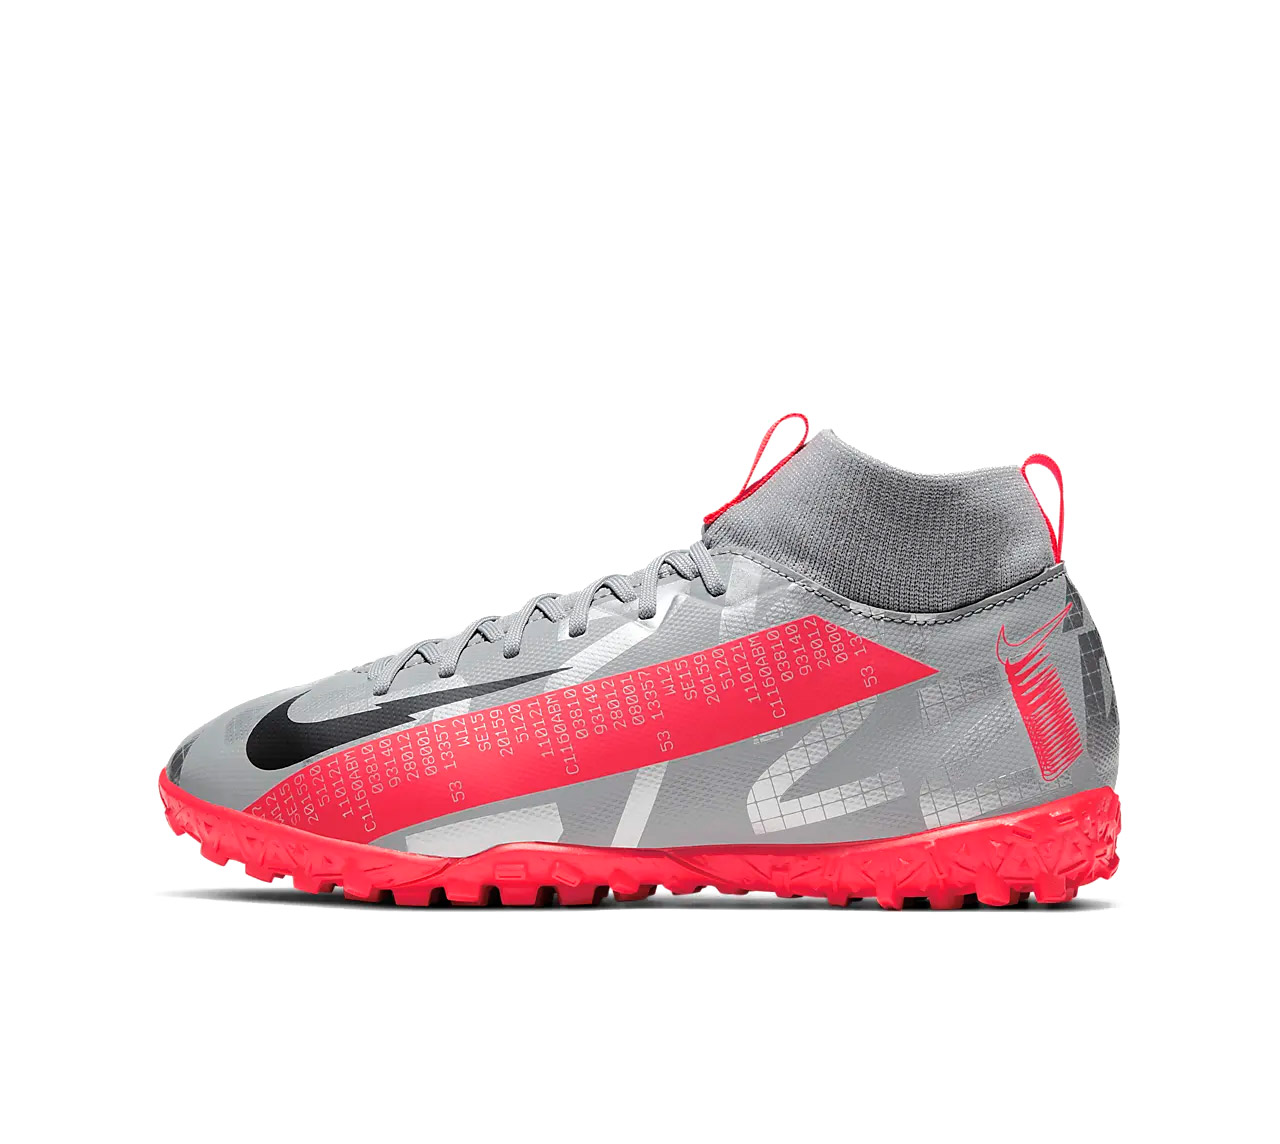 NIKE JR. MERCURIAL SUPERFLY 7 ACADEMY TF AT8143-906 Ασημί